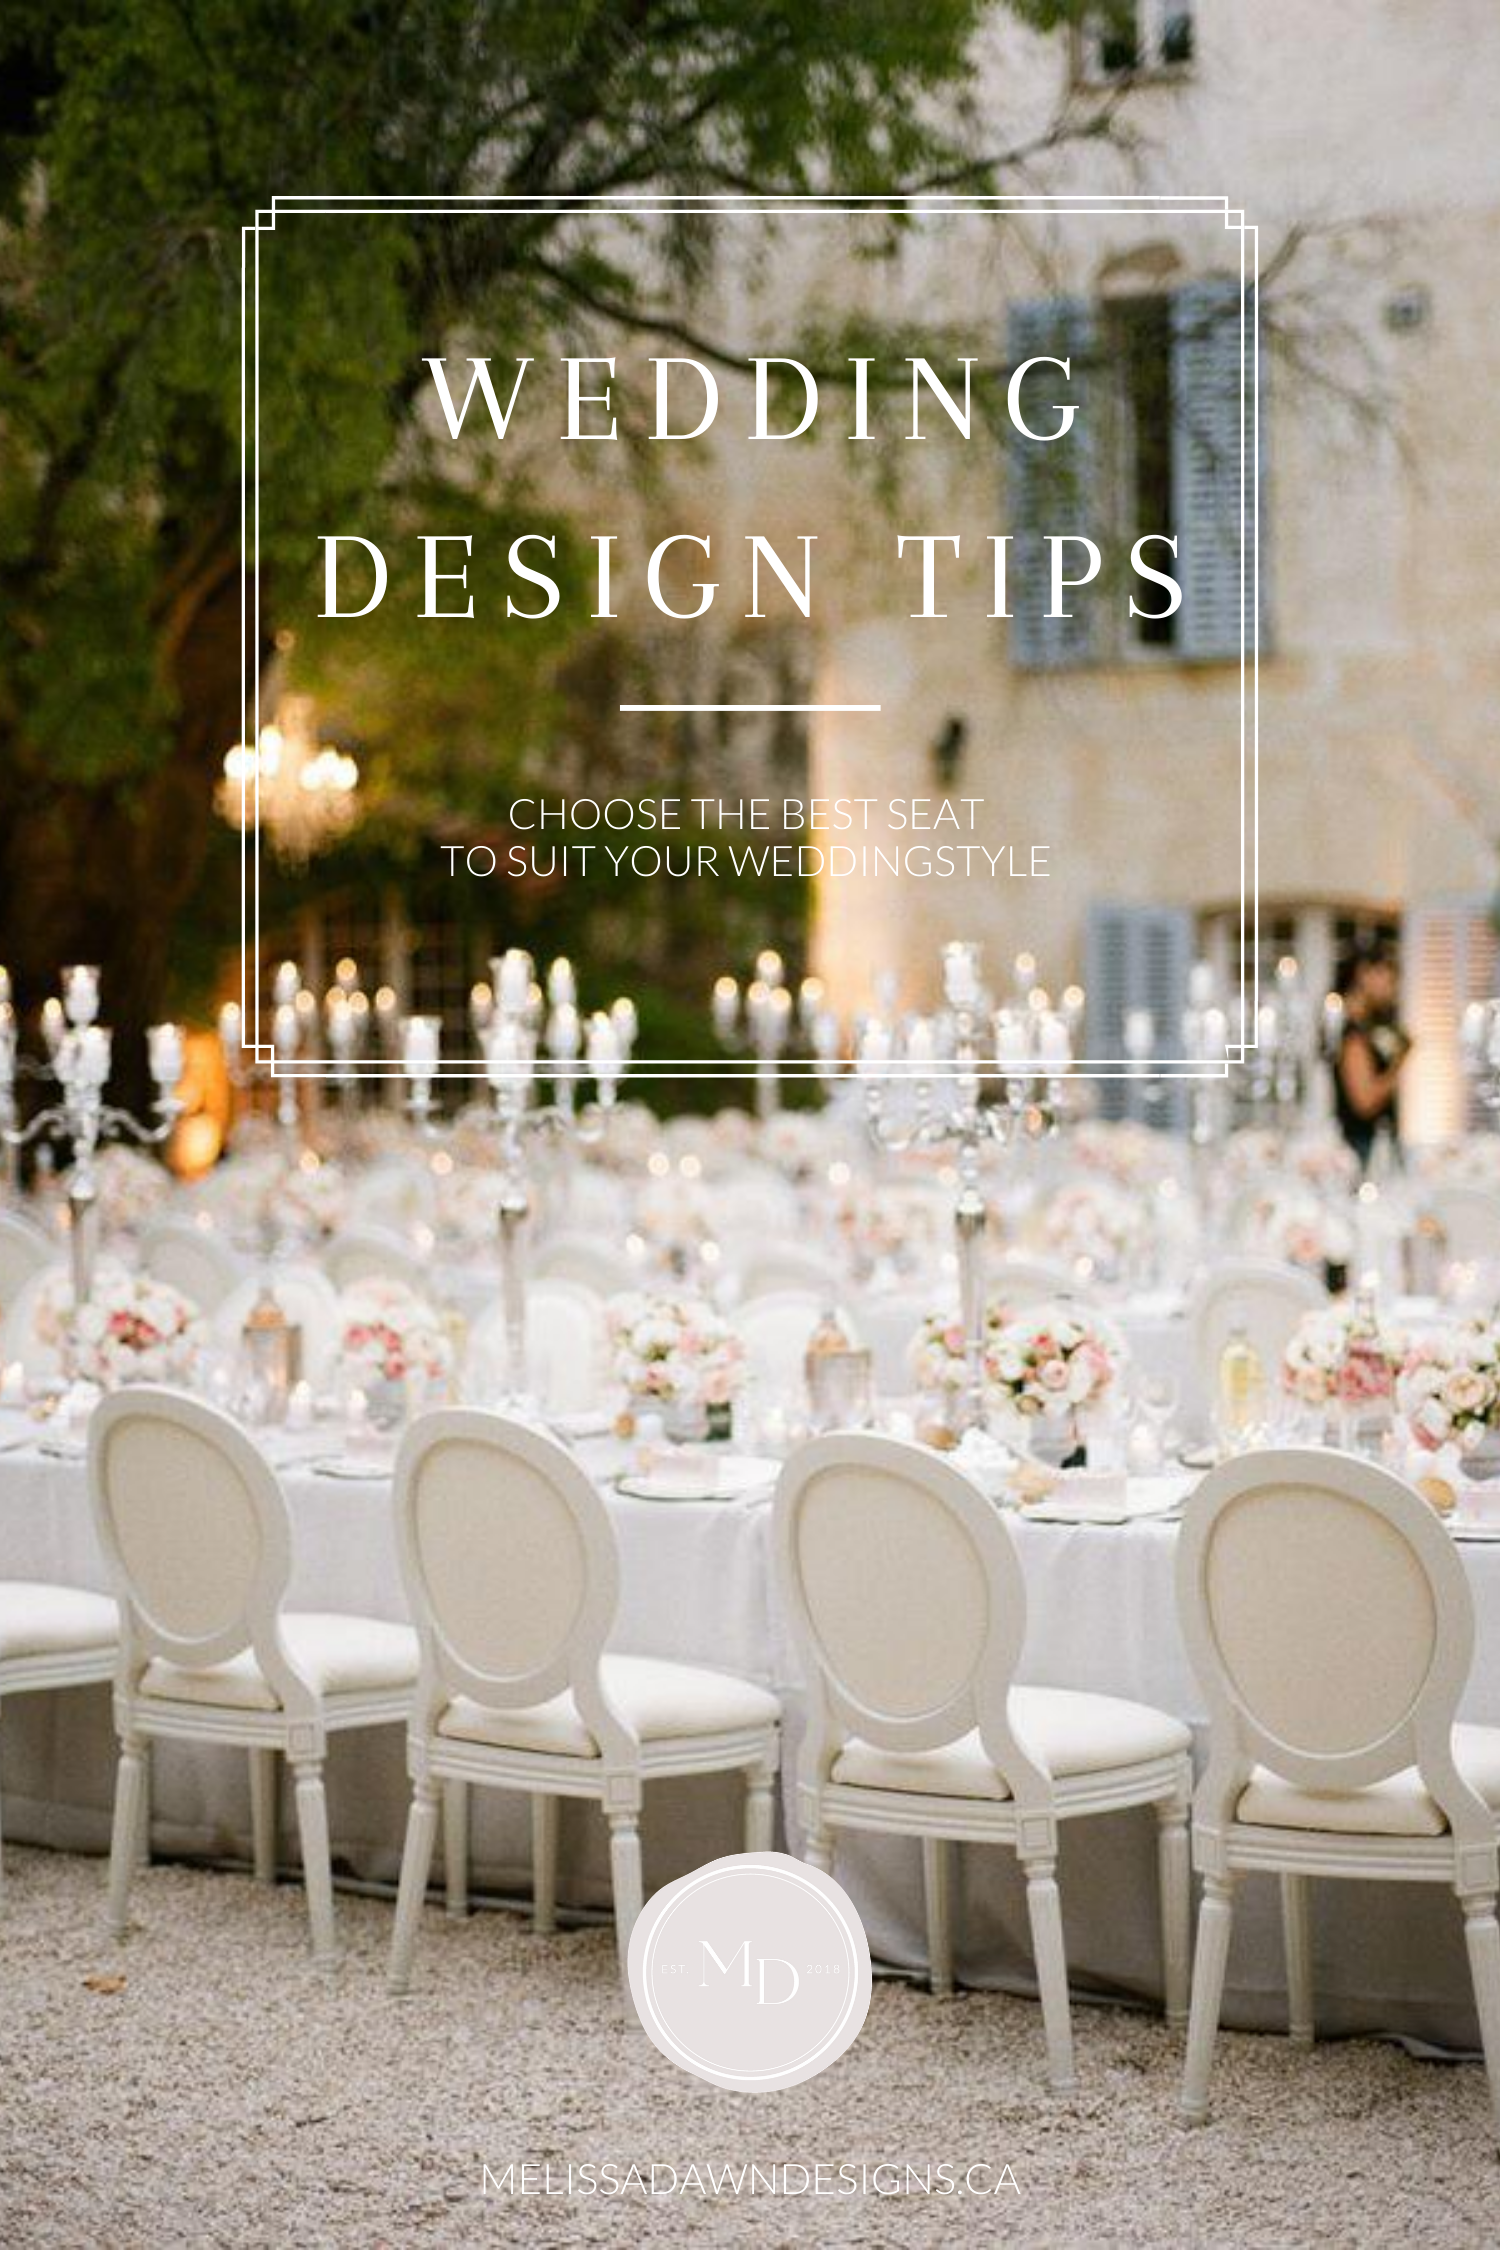 cane-back-wedding-chair-reception-table.png